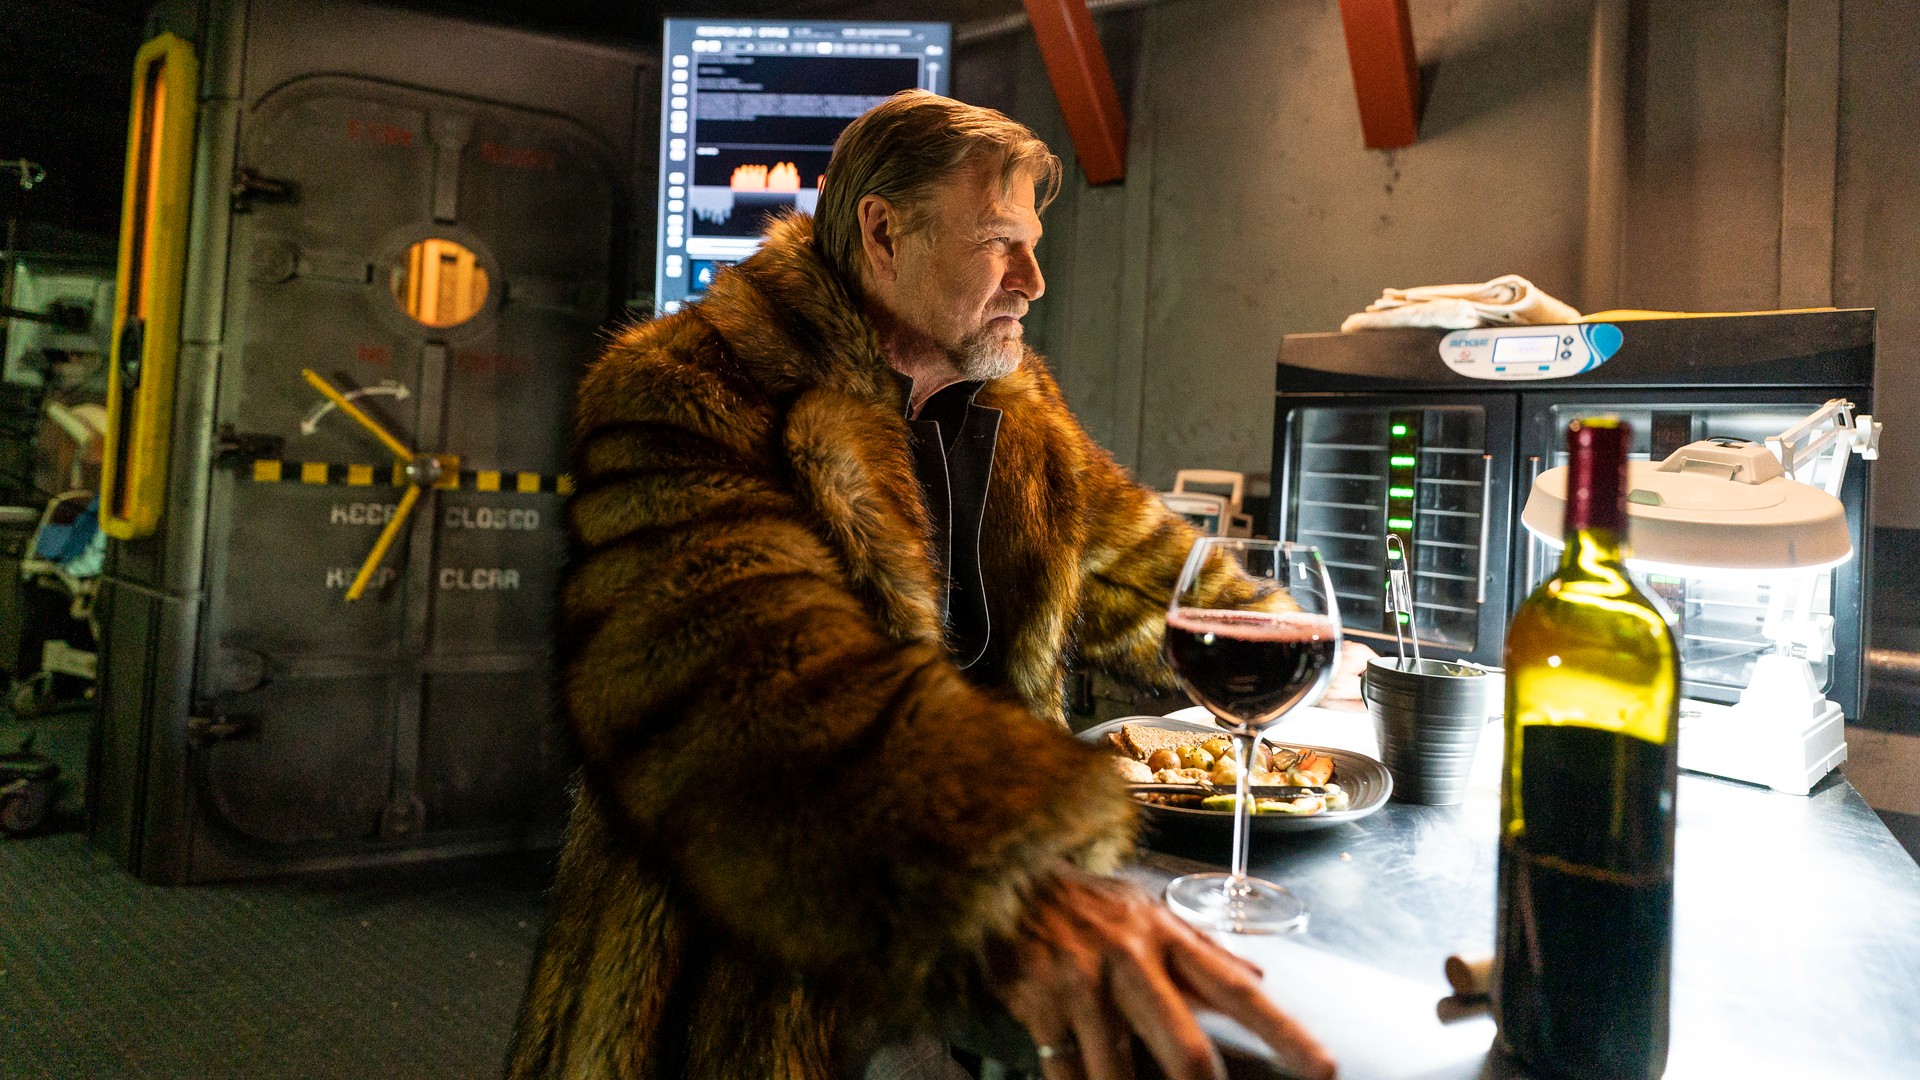 Snowpiercer Season 3 Episode 1 Review: The Tortoise and the Hare - Den of Geek